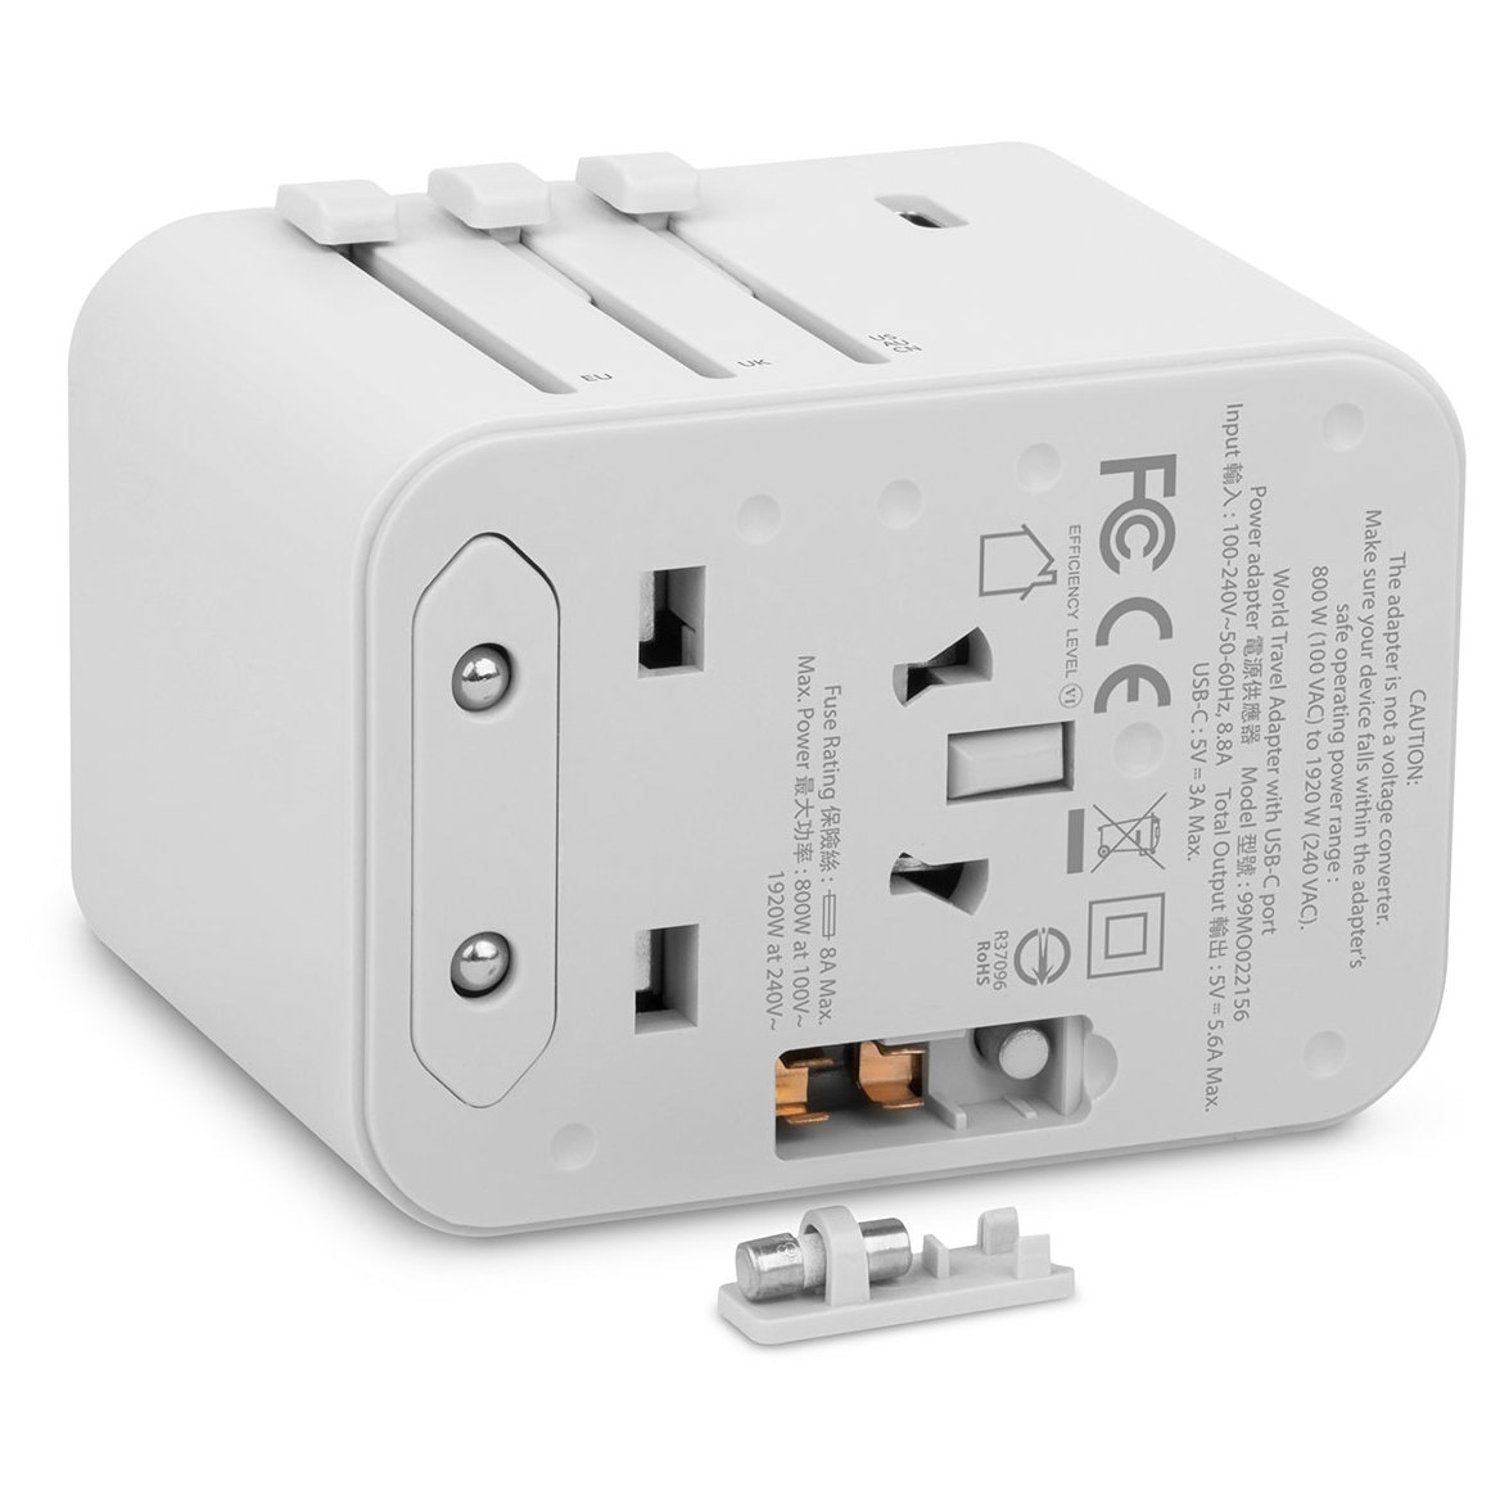 Moshi World Travel Adapter with USB-C and 4 USB Ports - White